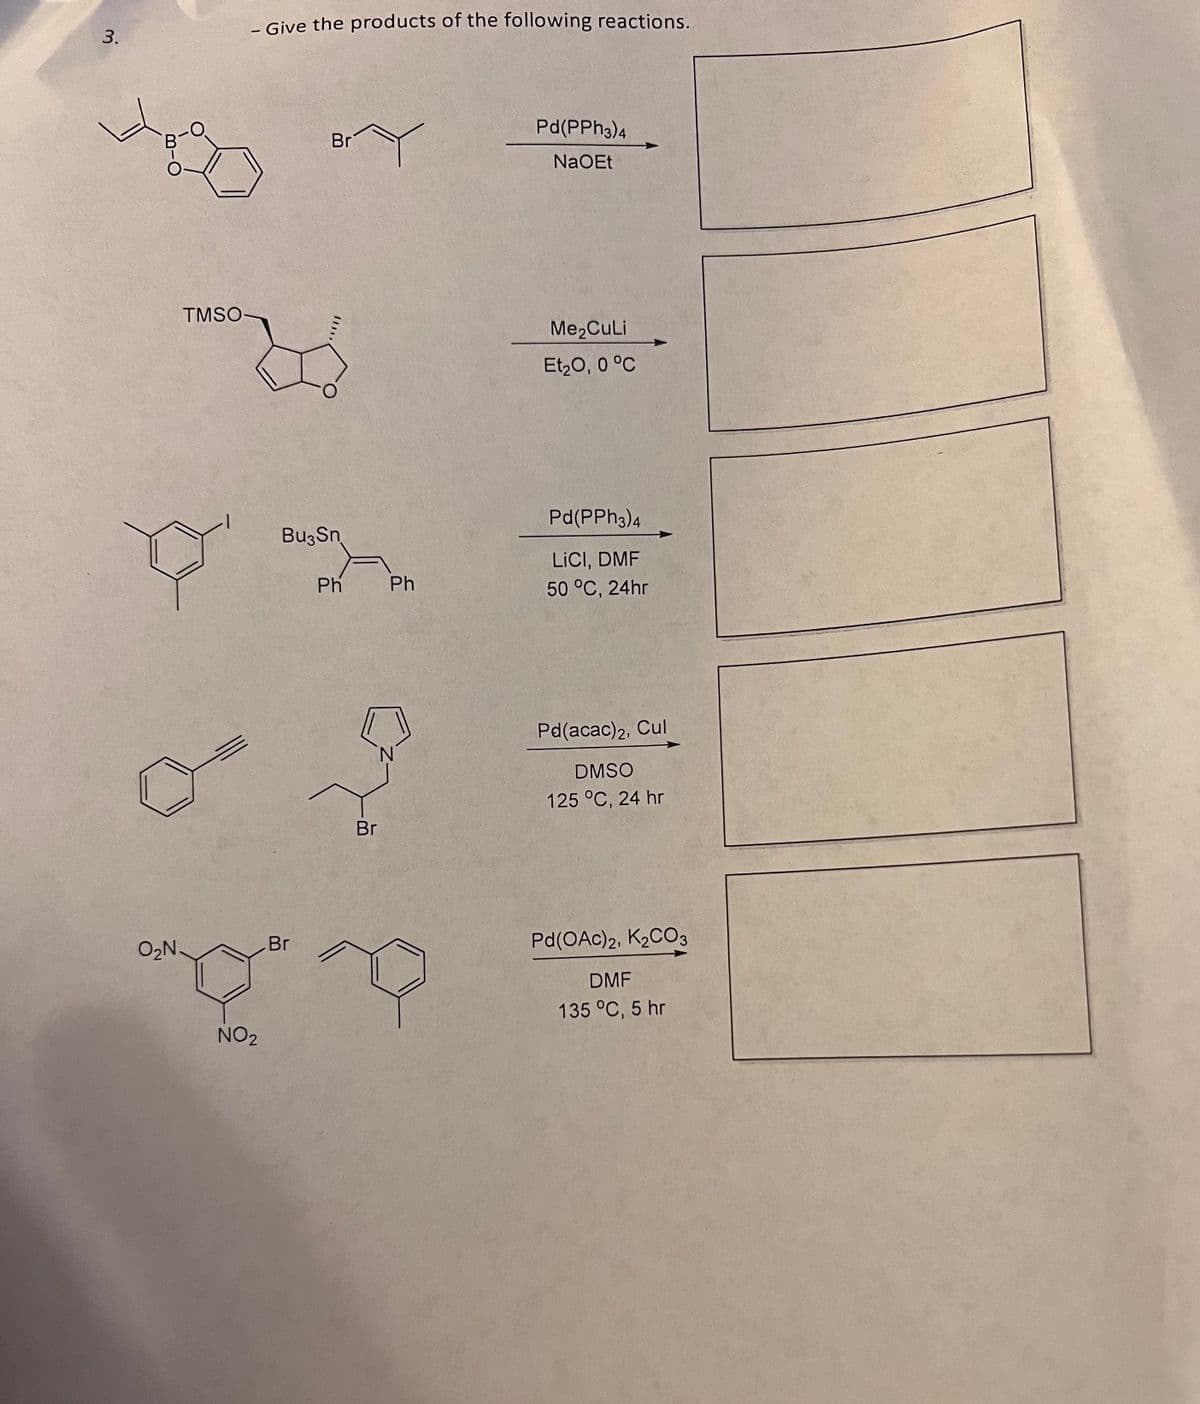 3.
O₂N
- Give the products of the following reactions.
Br
Pd(PPh3)4
NaOEt
TMSO
Me₂CuLi
Et2O, 0 °C
NO2
Br
Bu3Sn
Ph
Ph
Pd(PPh3)4
LICI, DMF
50 °C, 24hr
Br
Pd(acac)2, Cul
DMSO
125 °C, 24 hr
Pd(OAc)2, K2CO3
DMF
135 °C, 5 hr